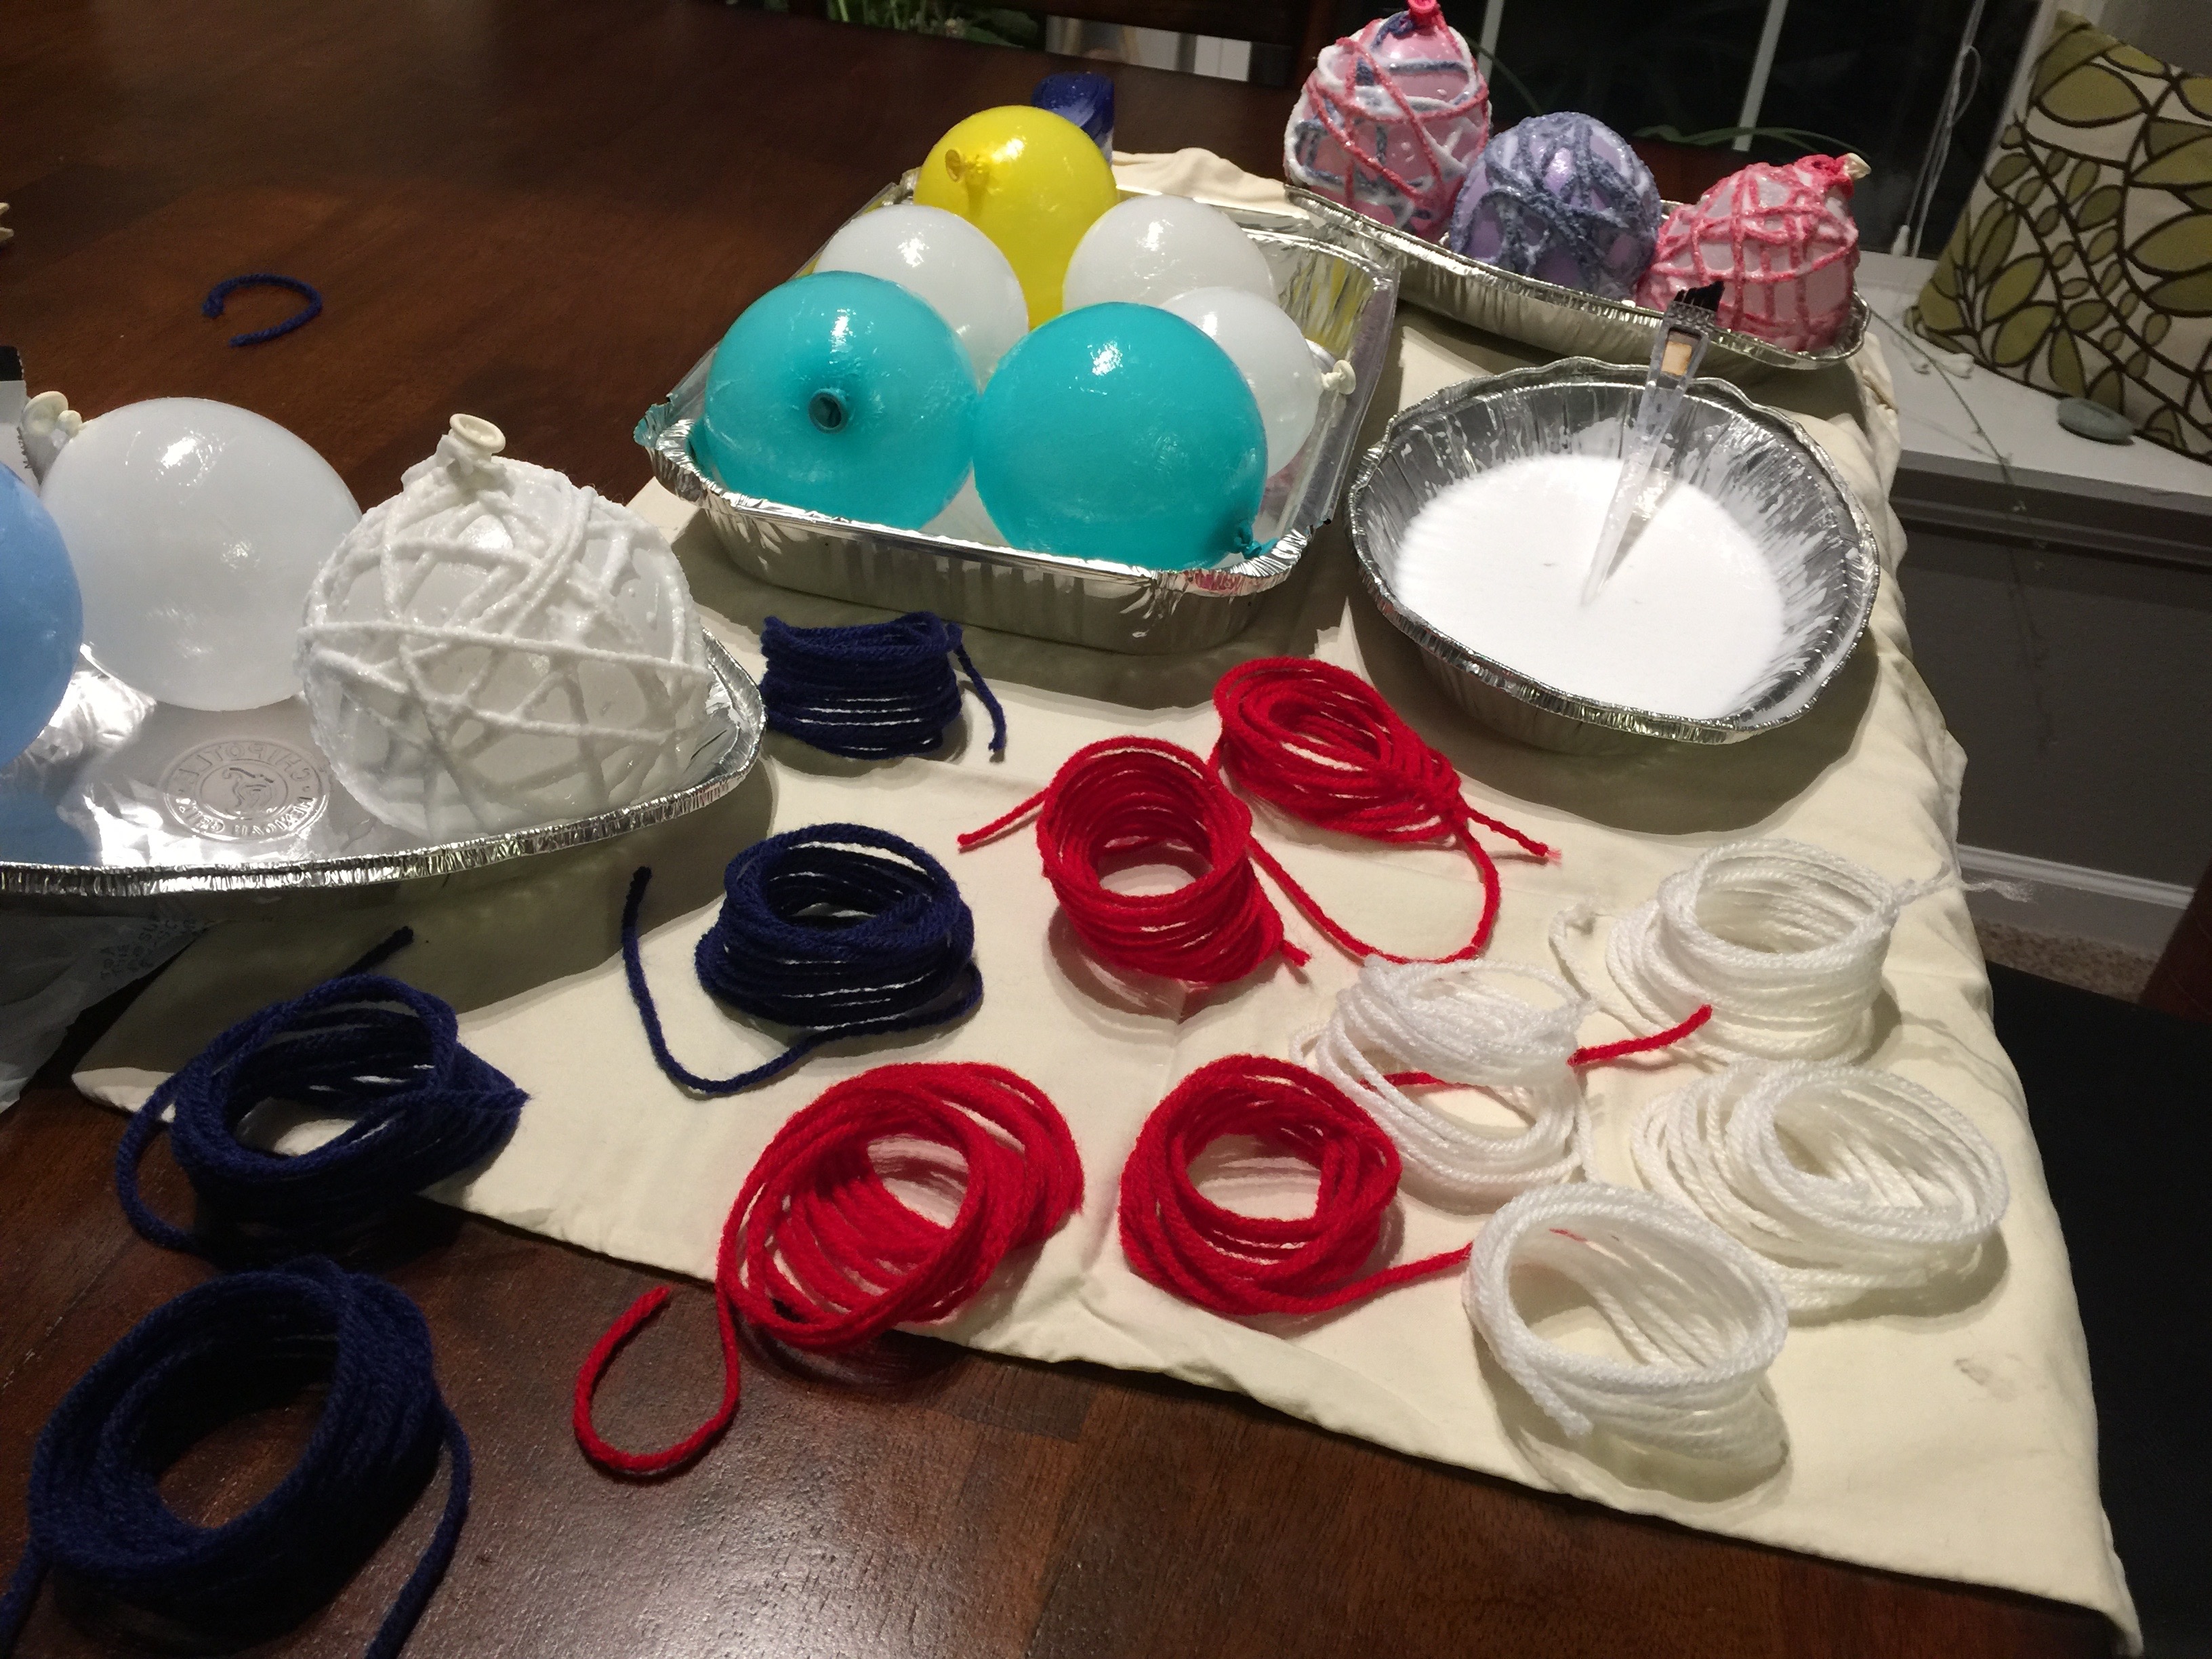 Piles of yarn and glue